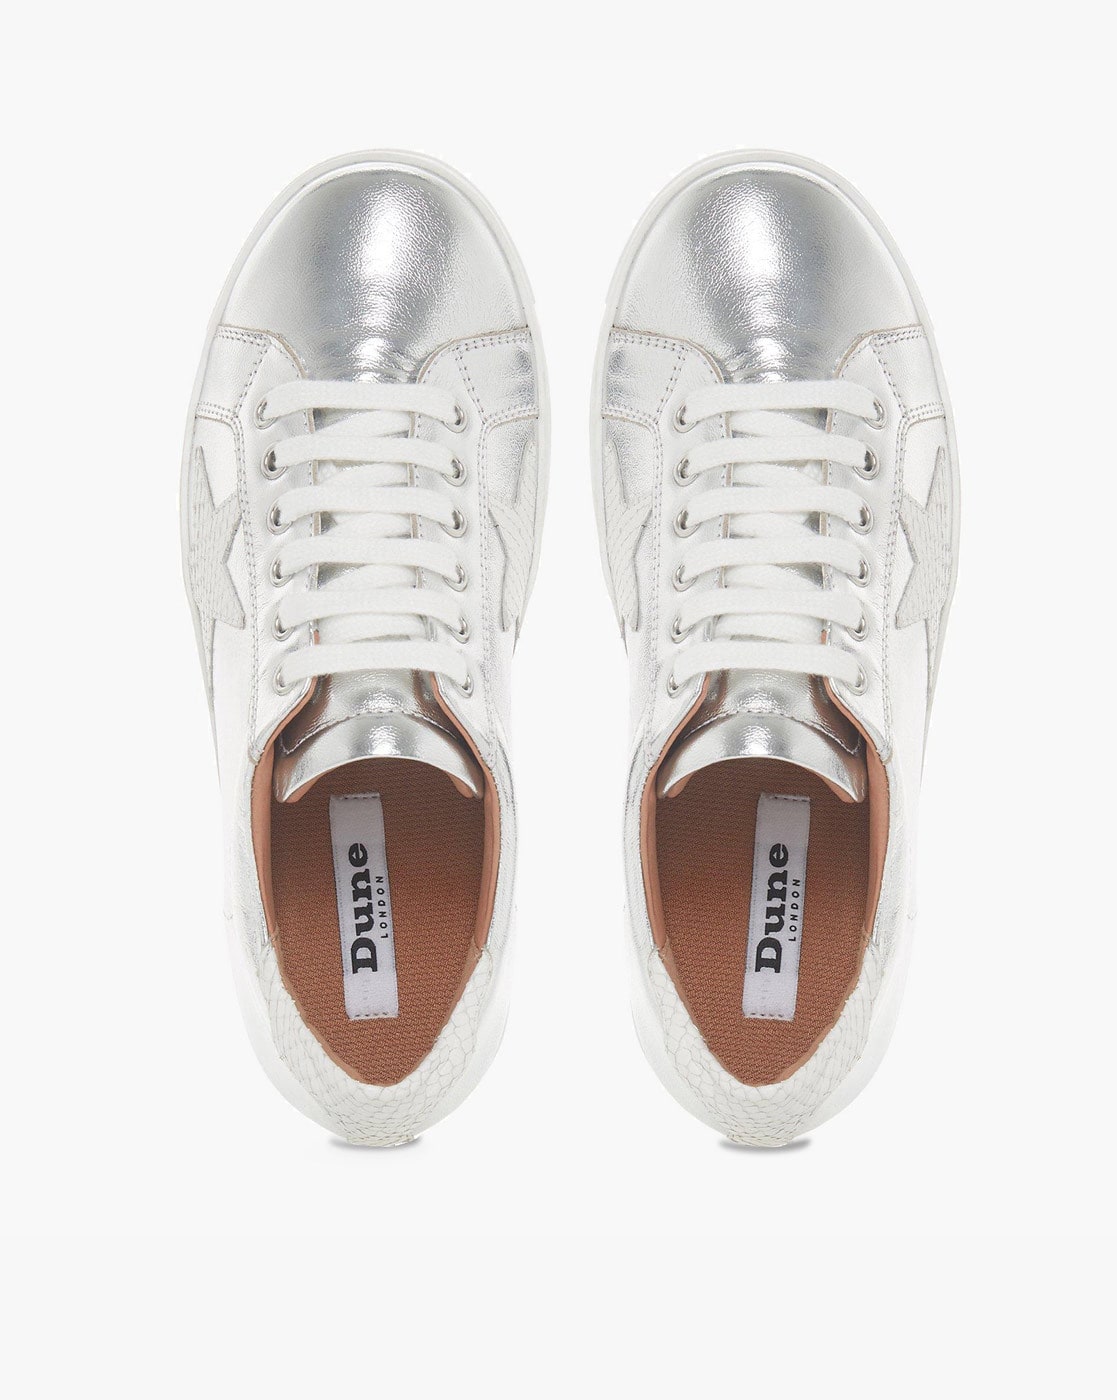 Flat Shoes for Women by Dune London 